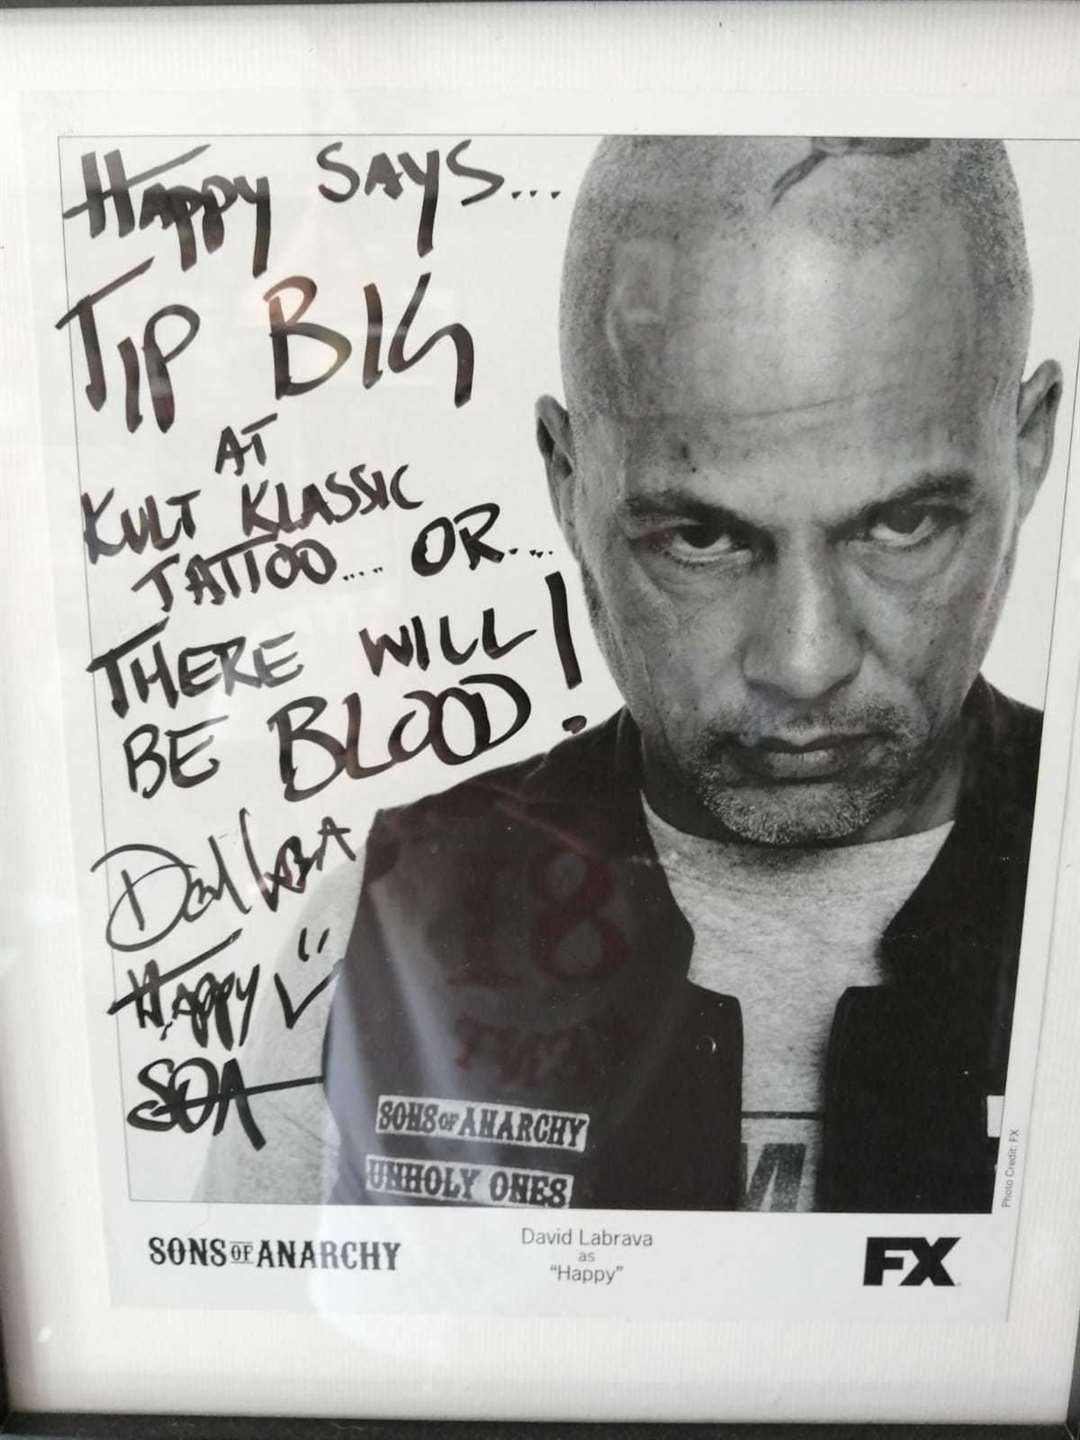 A signed photo of previous Kult Klassic Tattoo Studio customer David Labrava from the TV series Sons of Anarchy